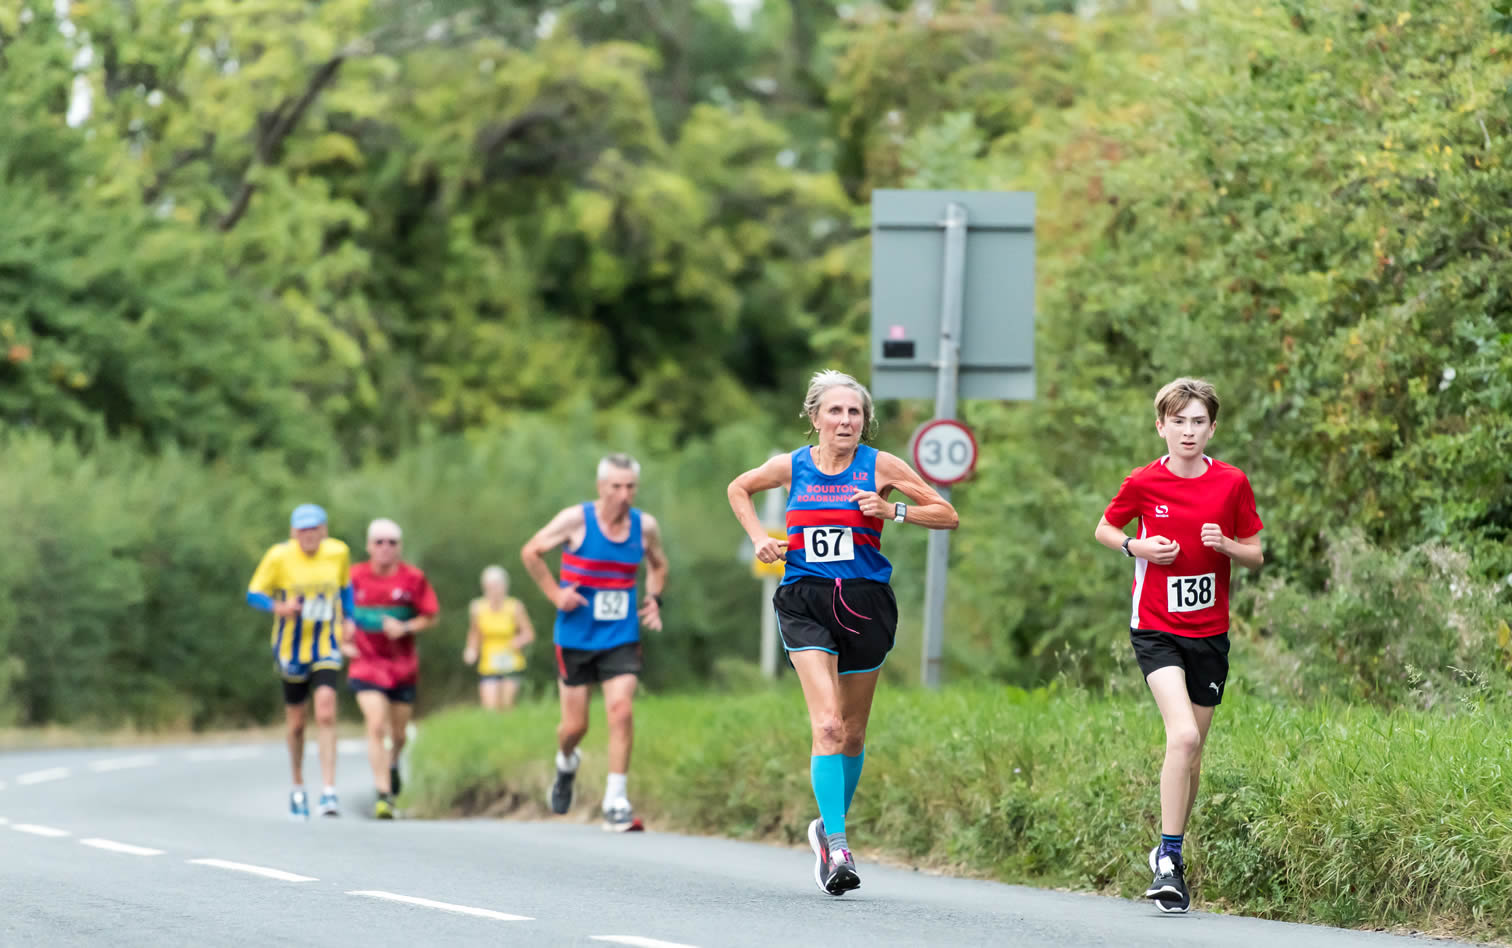 Bourton's Liz Hulcup and Tony Goodwill at Haresfield 5k, 300m to go - 17th August 2022